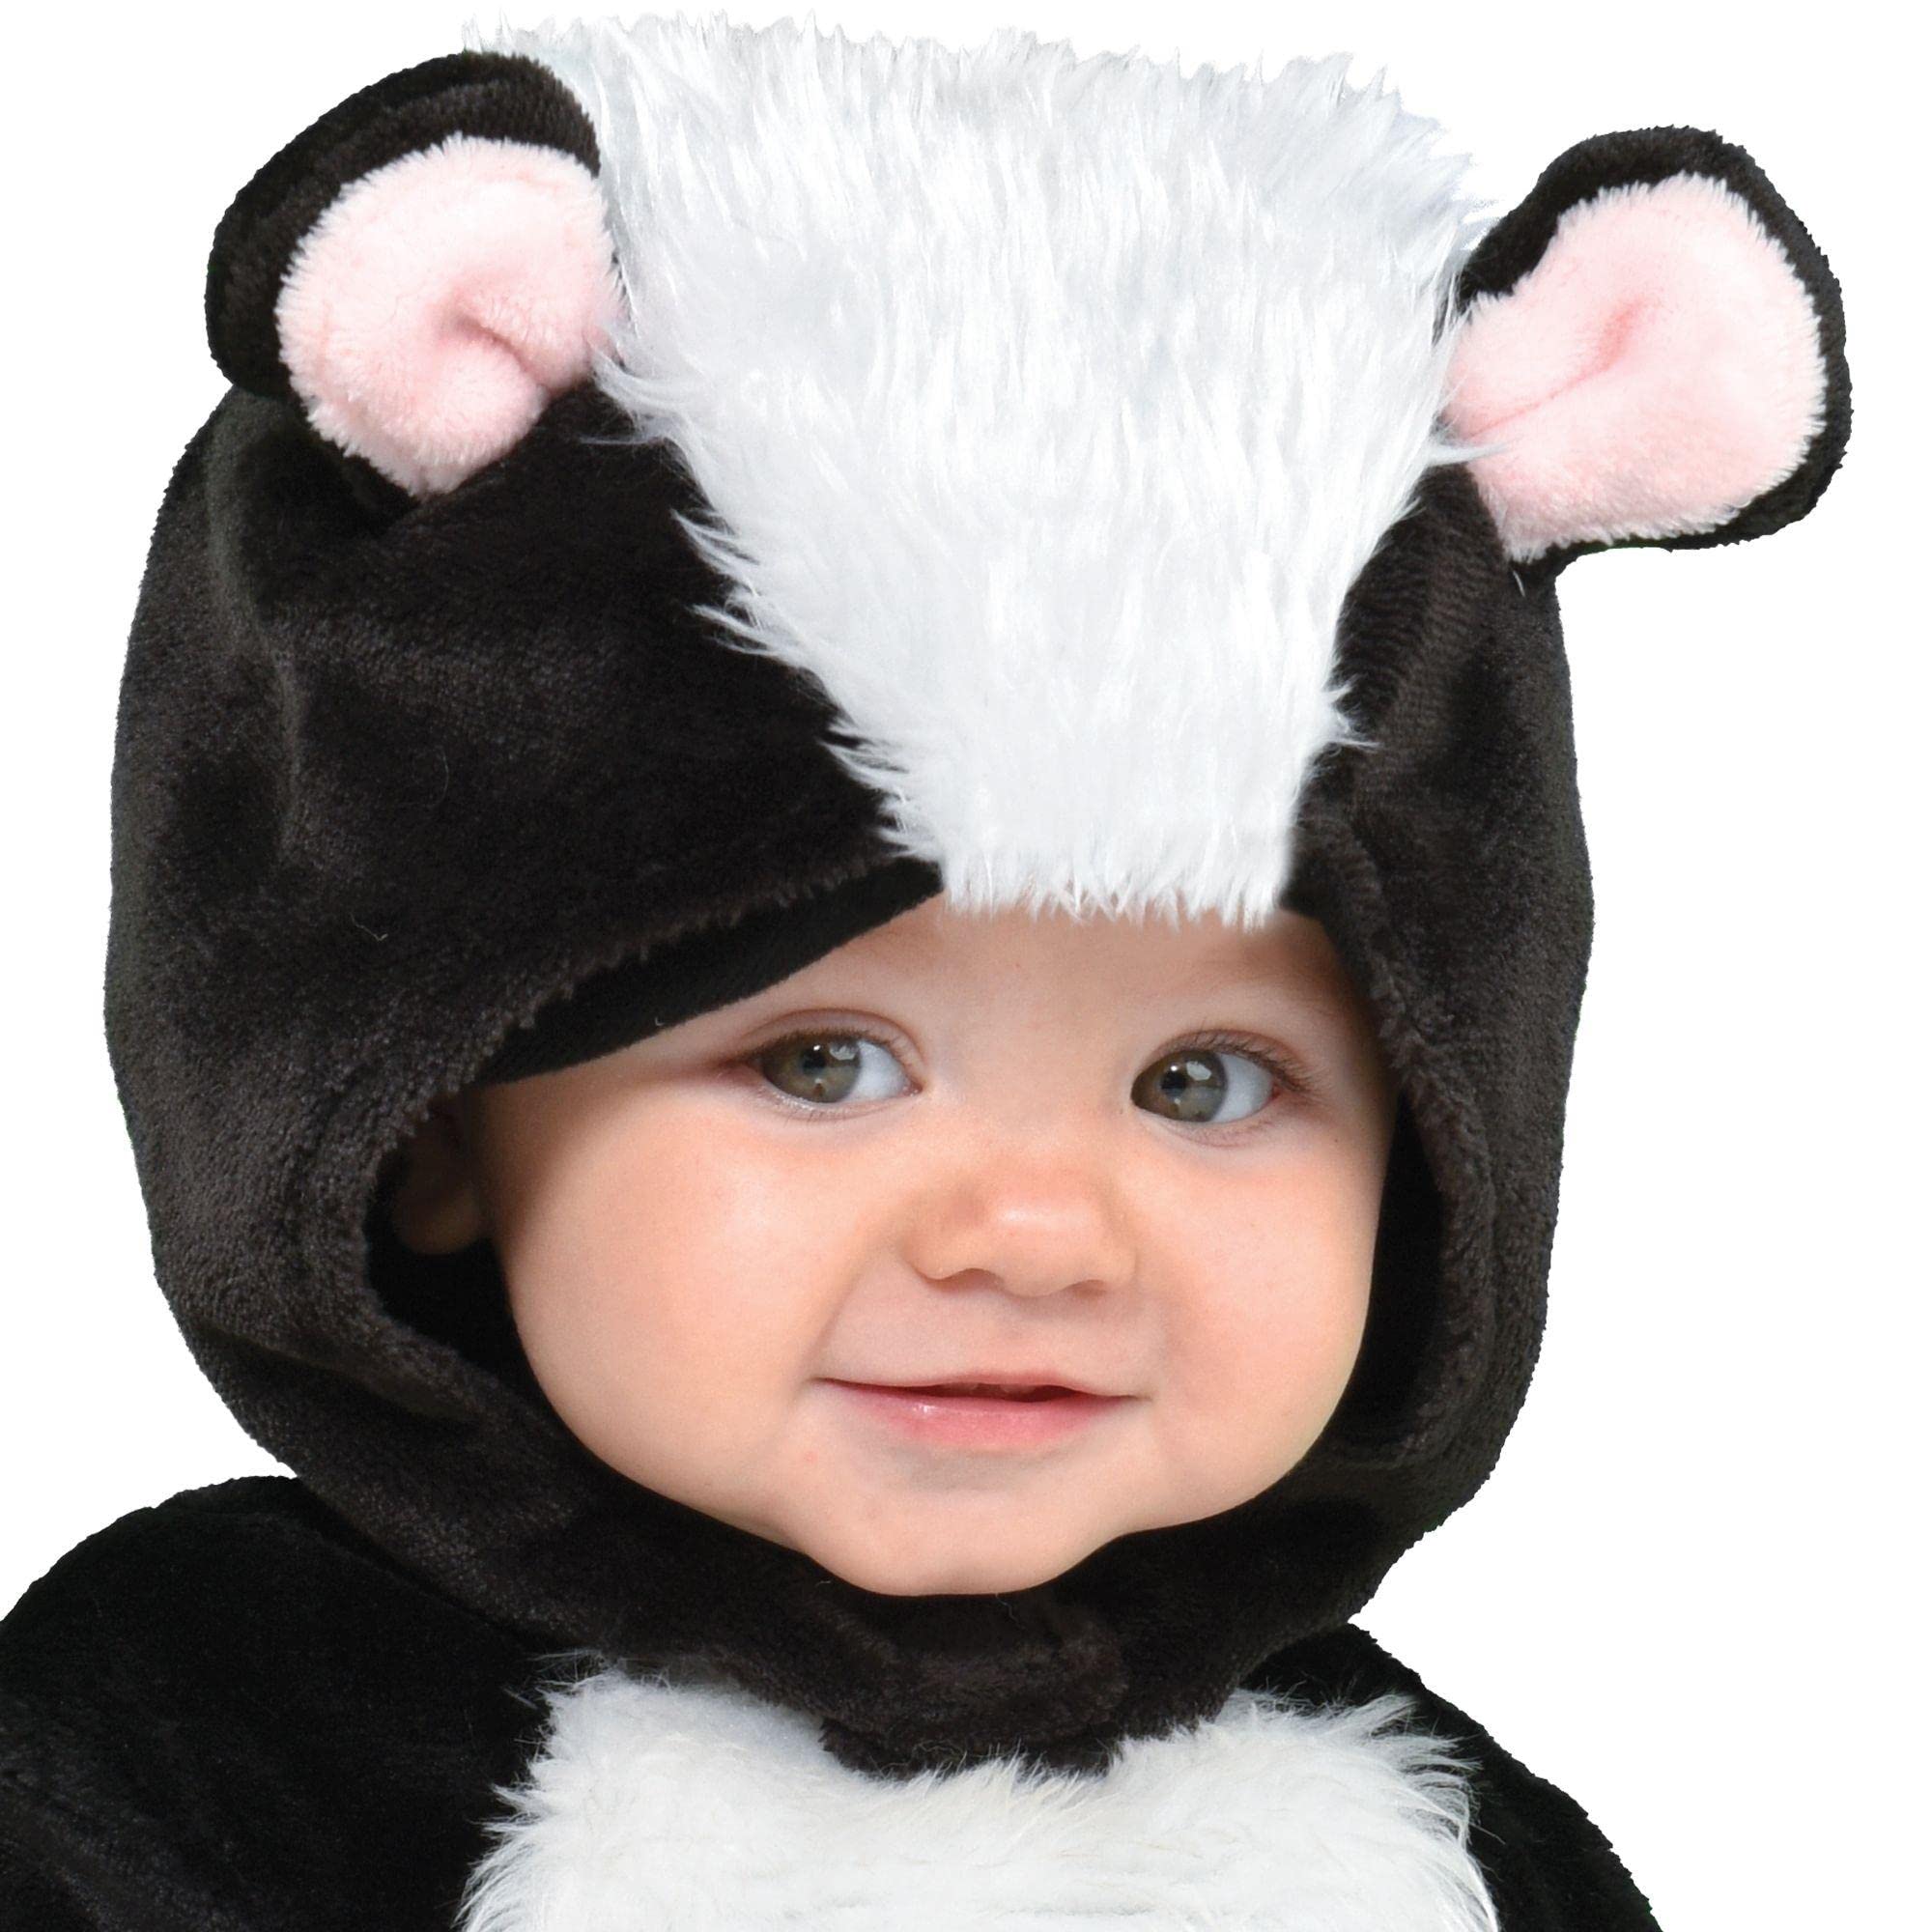 amscan Baby Skunk Hooded Jumpsuit - 6-12 Months -Black And White - 1 Pc